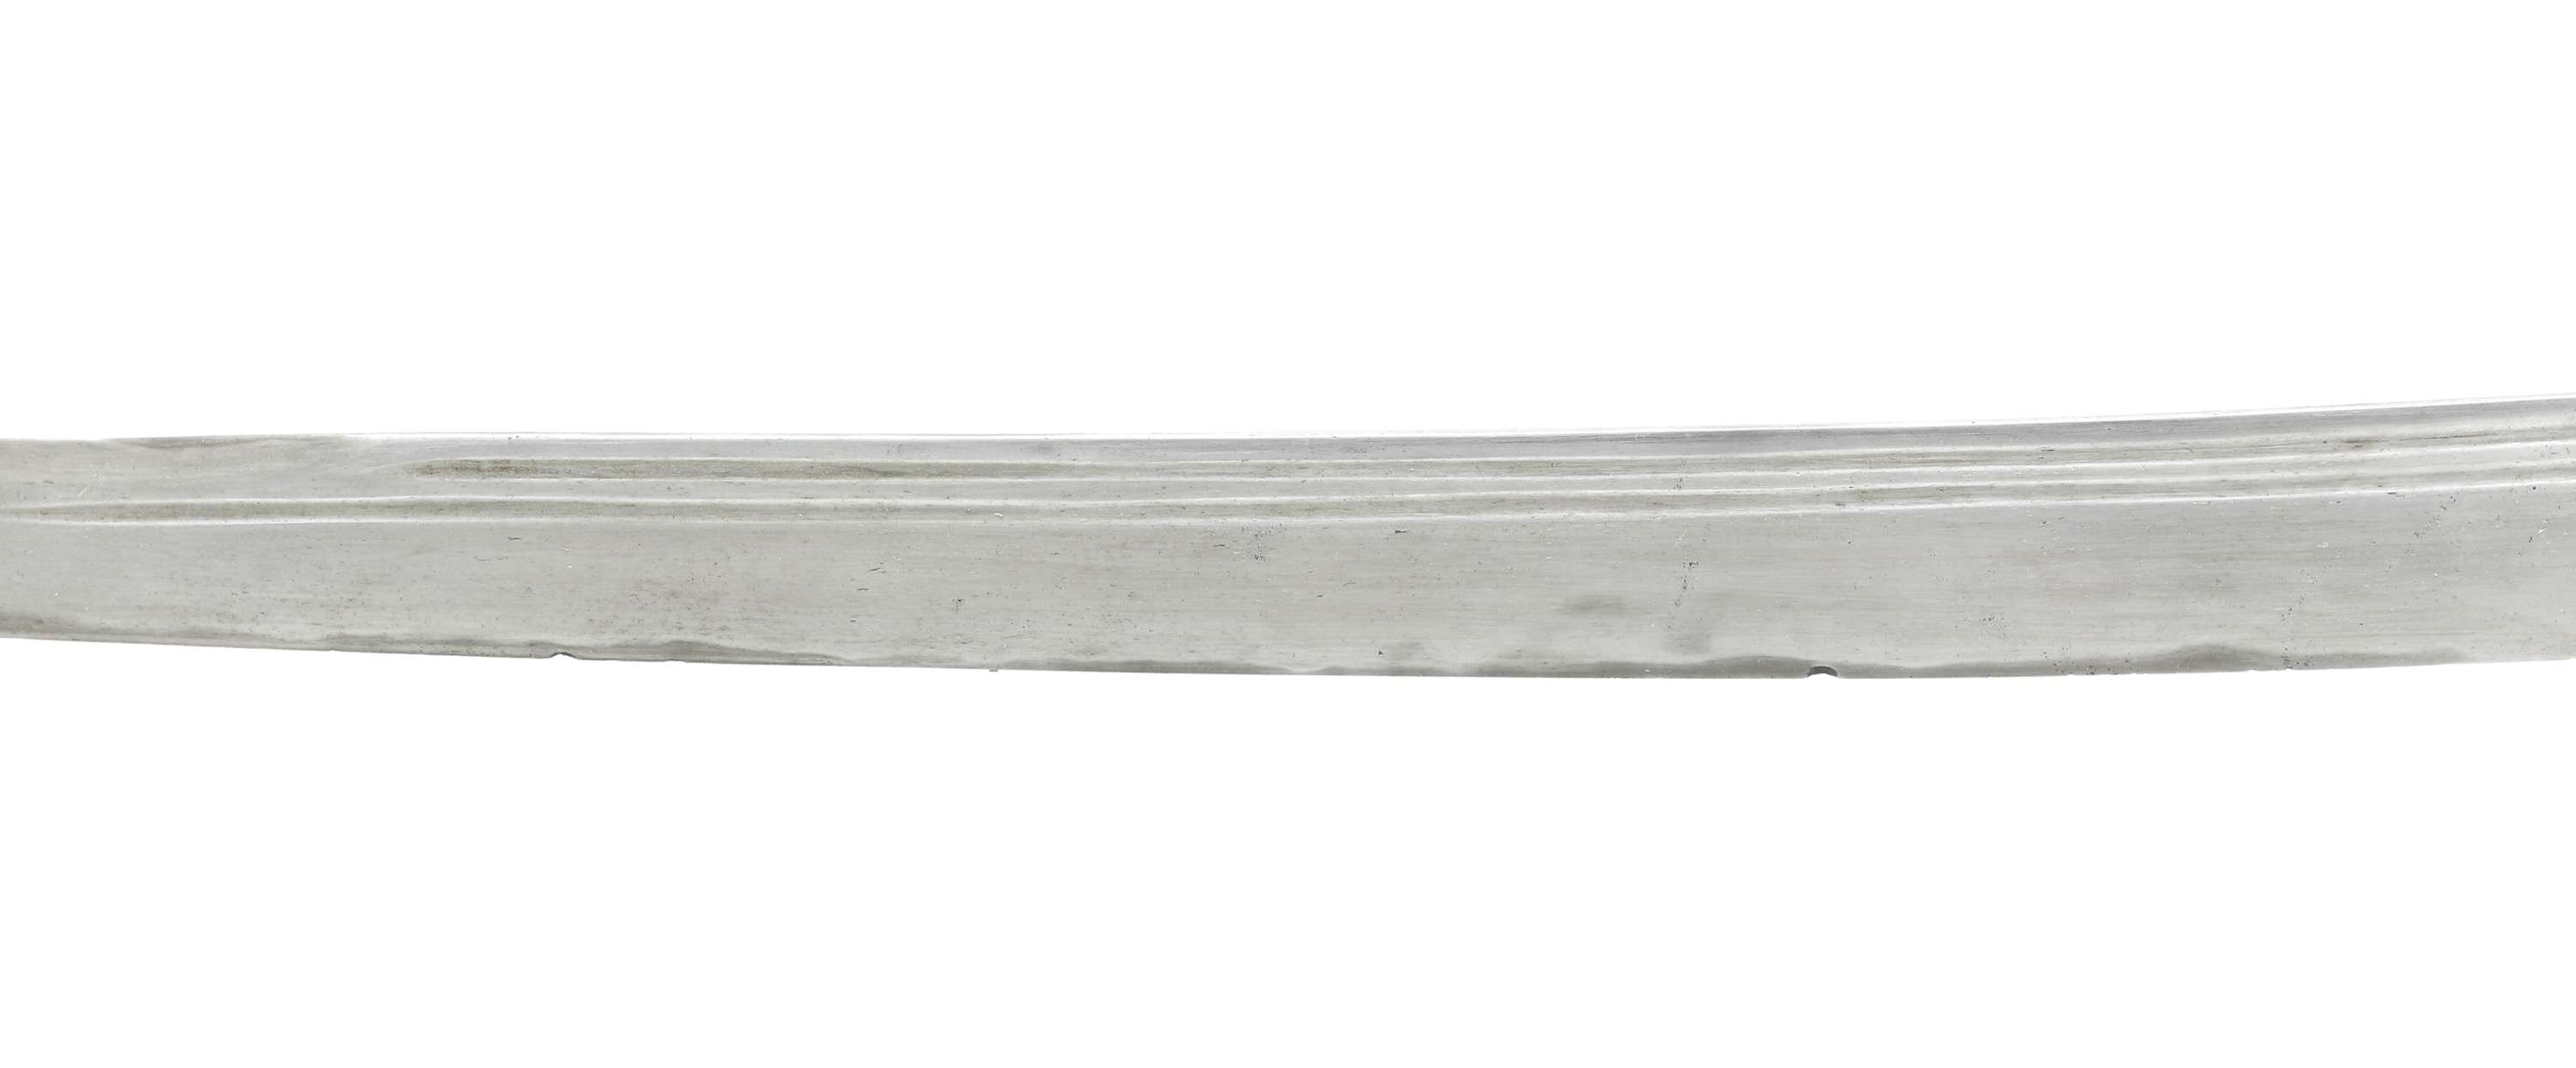 A southern Chinese military saber